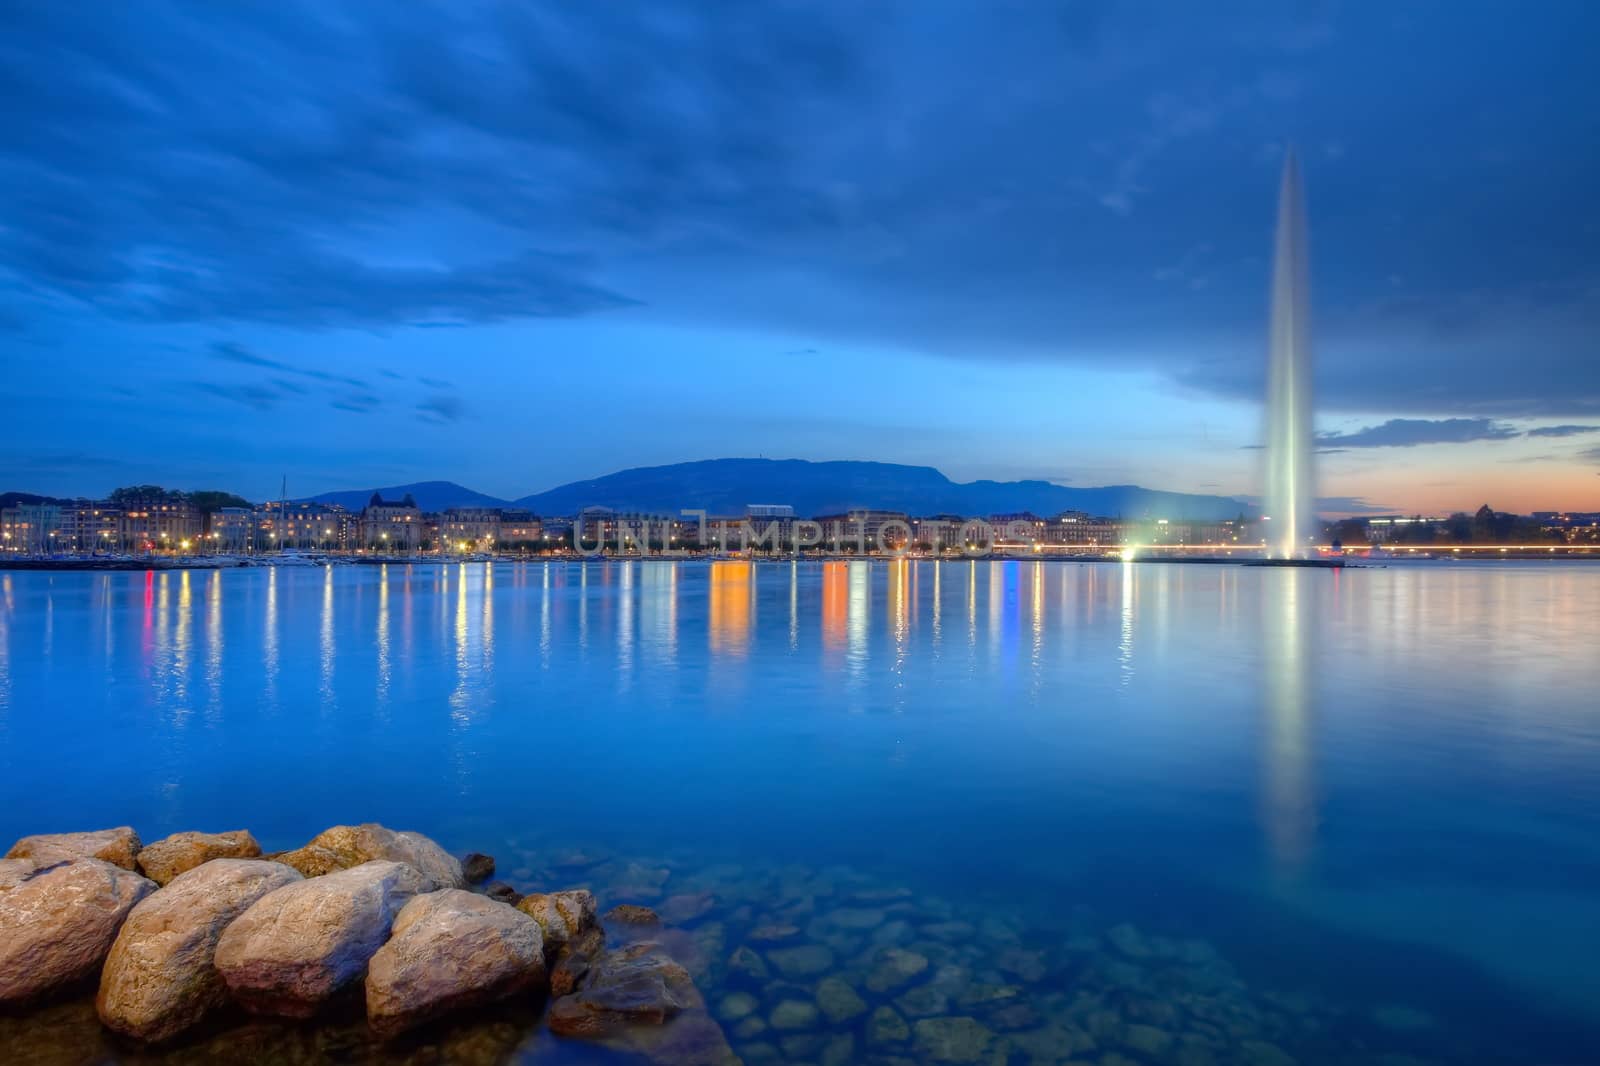 Geneva panorama with famous fountain, Switzerland, HDR by Elenaphotos21